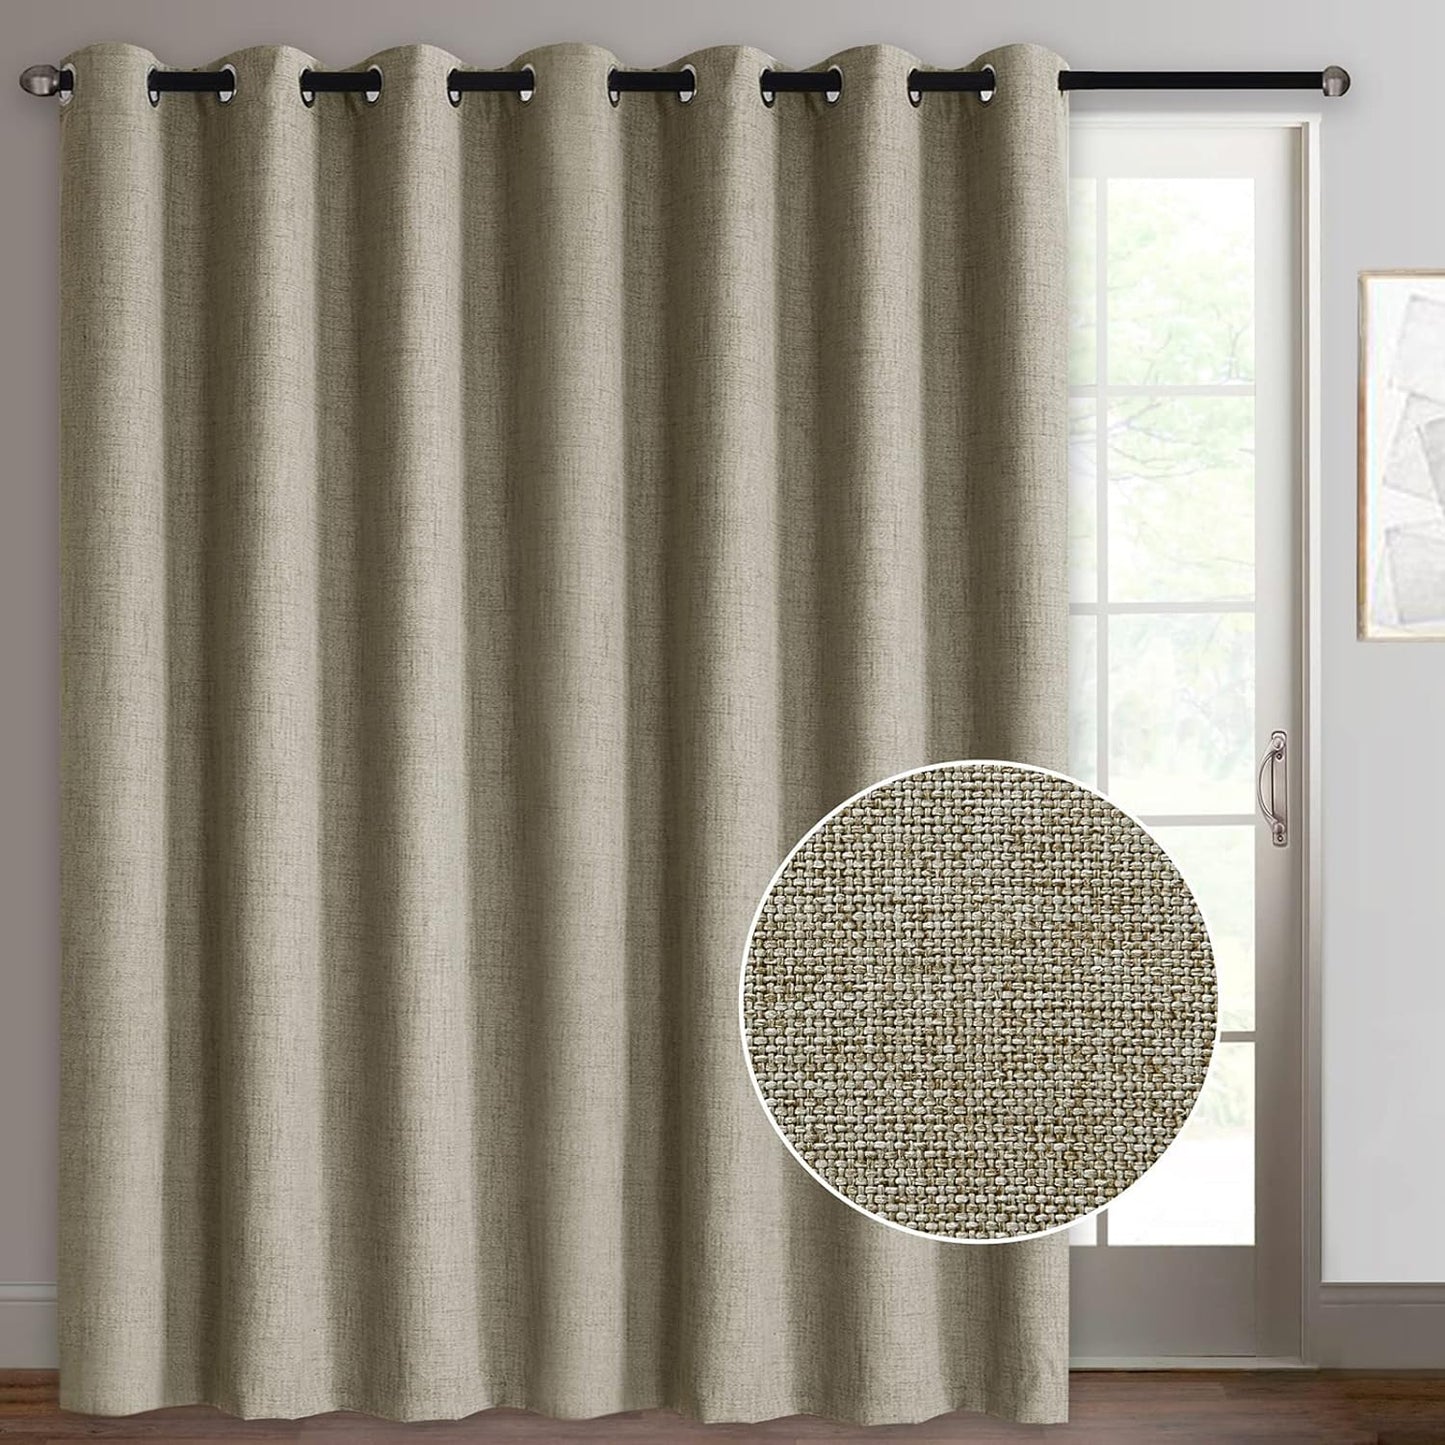 Rose Home Fashion Sliding Door Curtains, Primitive Linen Look 100% Blackout Curtains, Thermal Insulated Patio Door Curtains-1 Panel (W100 X L84, Grey)  Rose Home Fashion Natural W100 X L96|1 Panel 